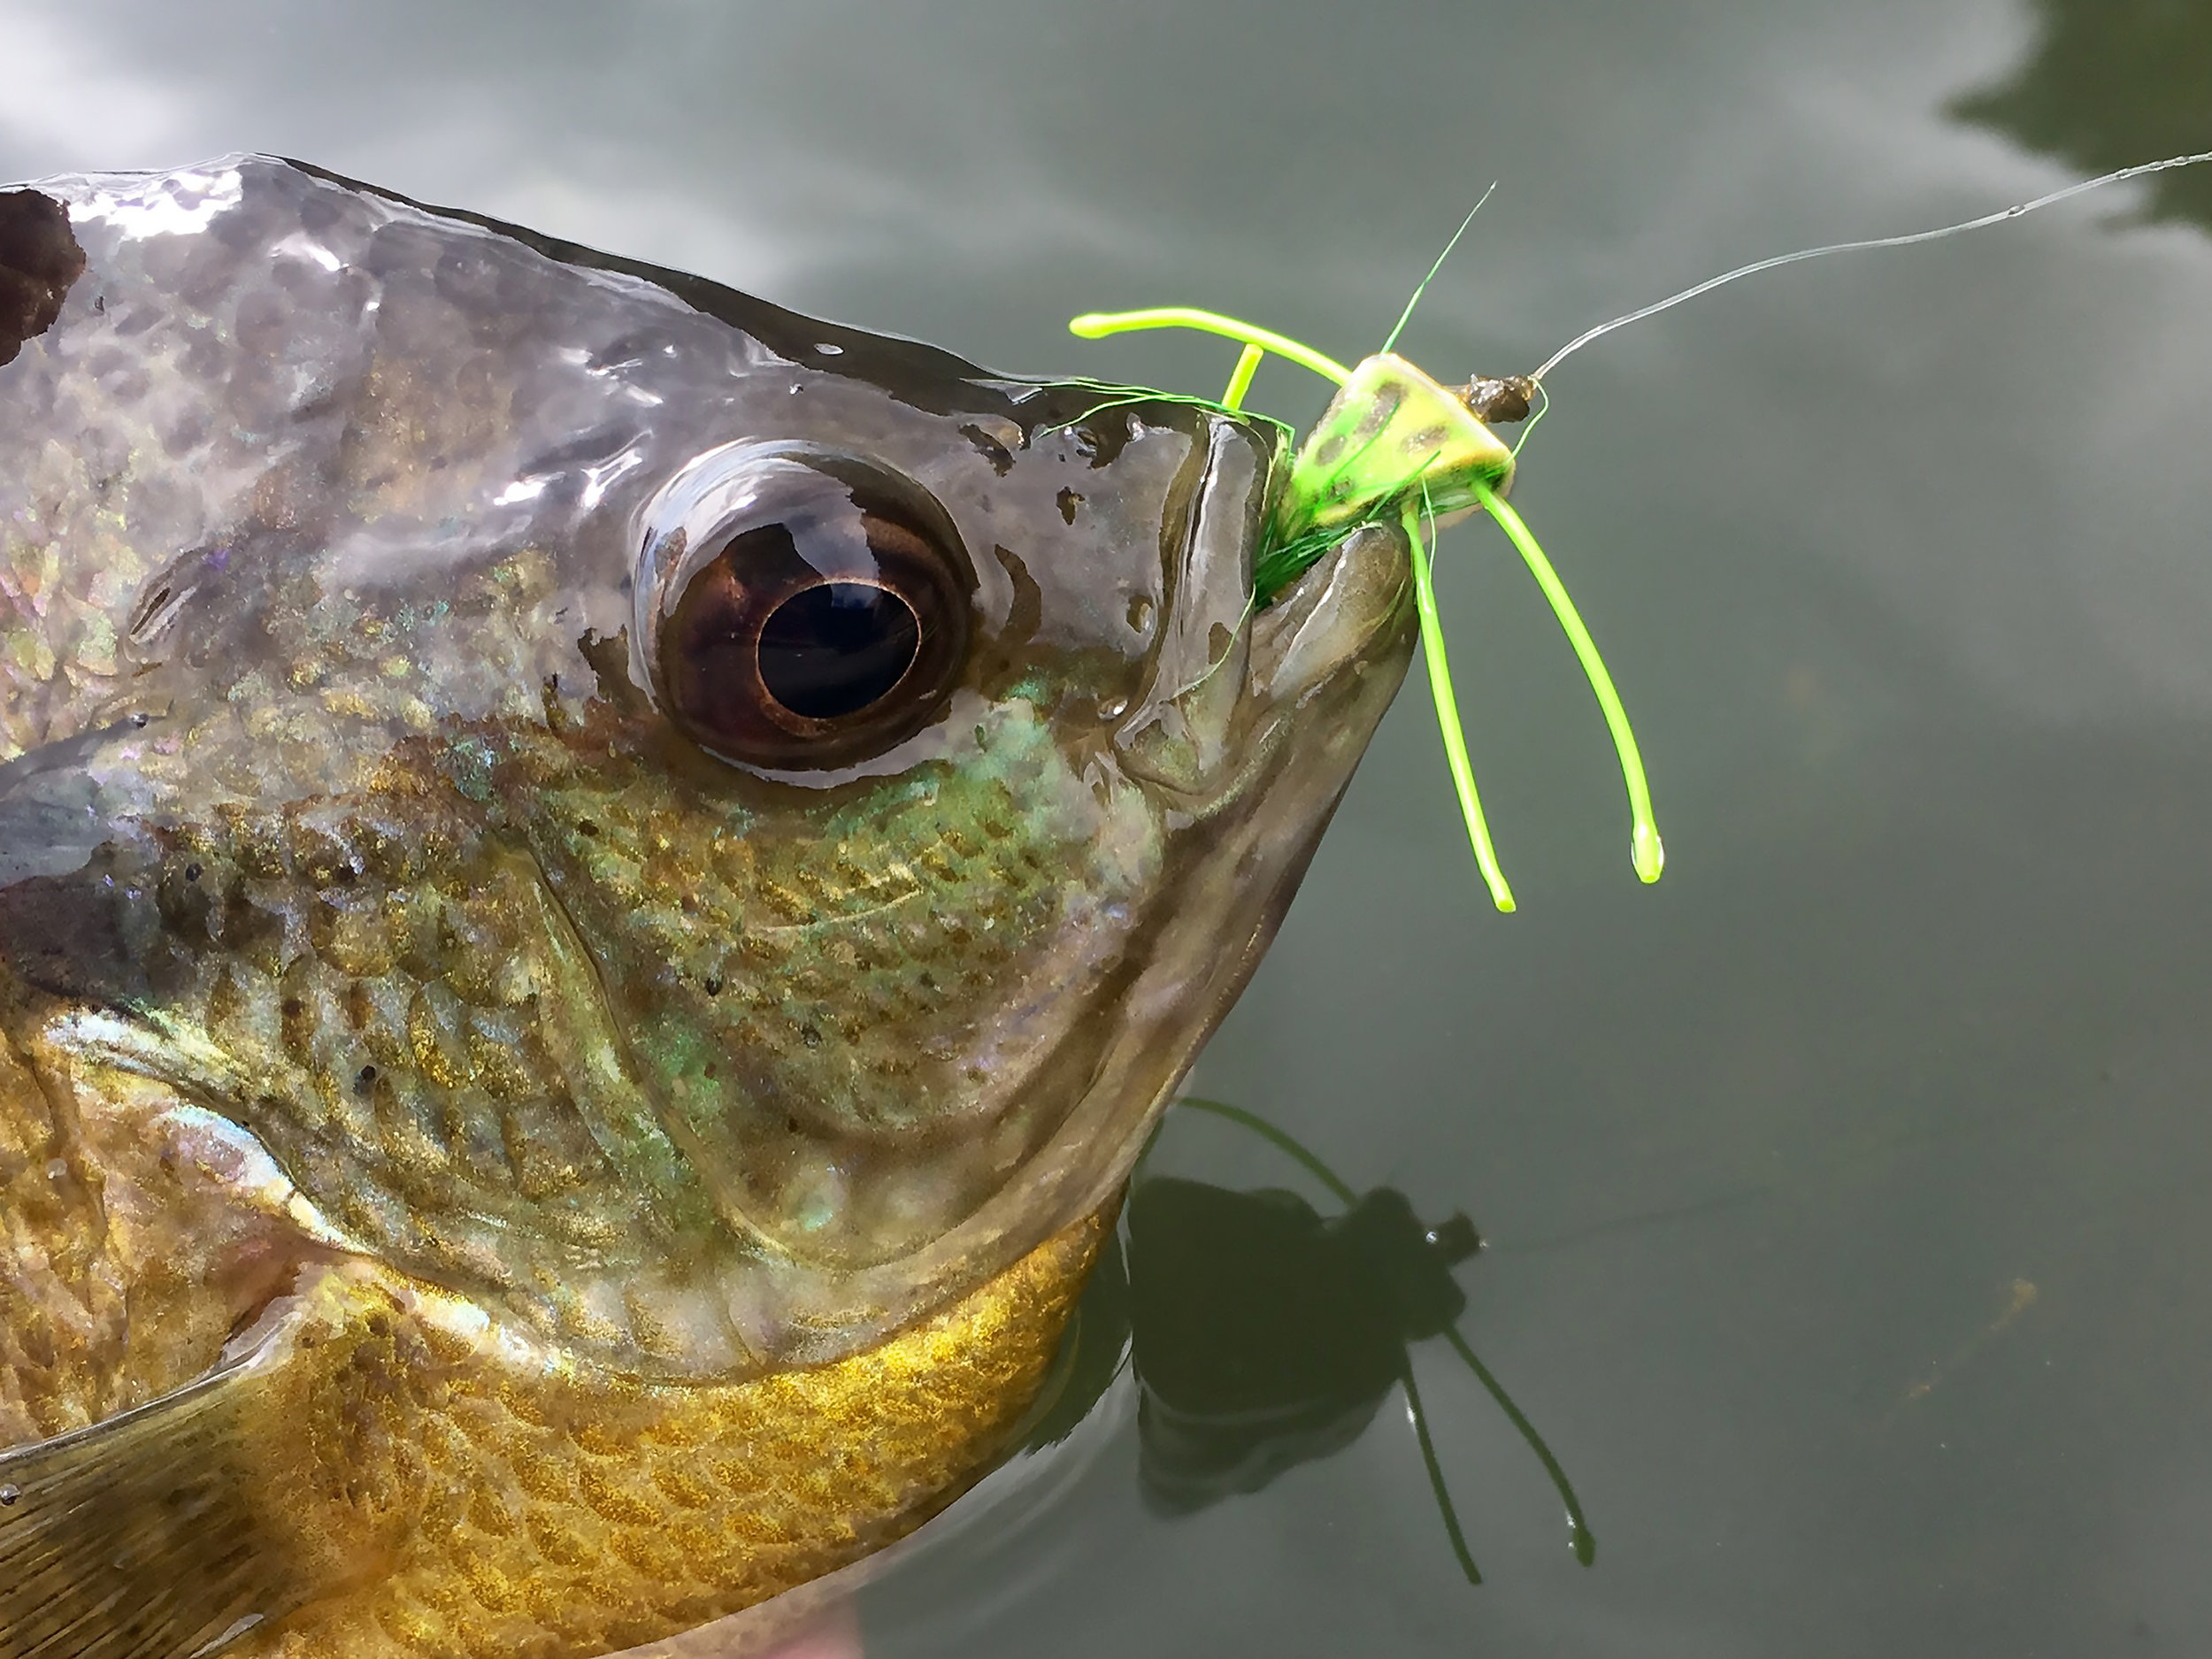 WFS 265 - The 13 Essential Panfish Flies with Bart Lombardo from Panfish on  the Fly - Wet Fly Swing